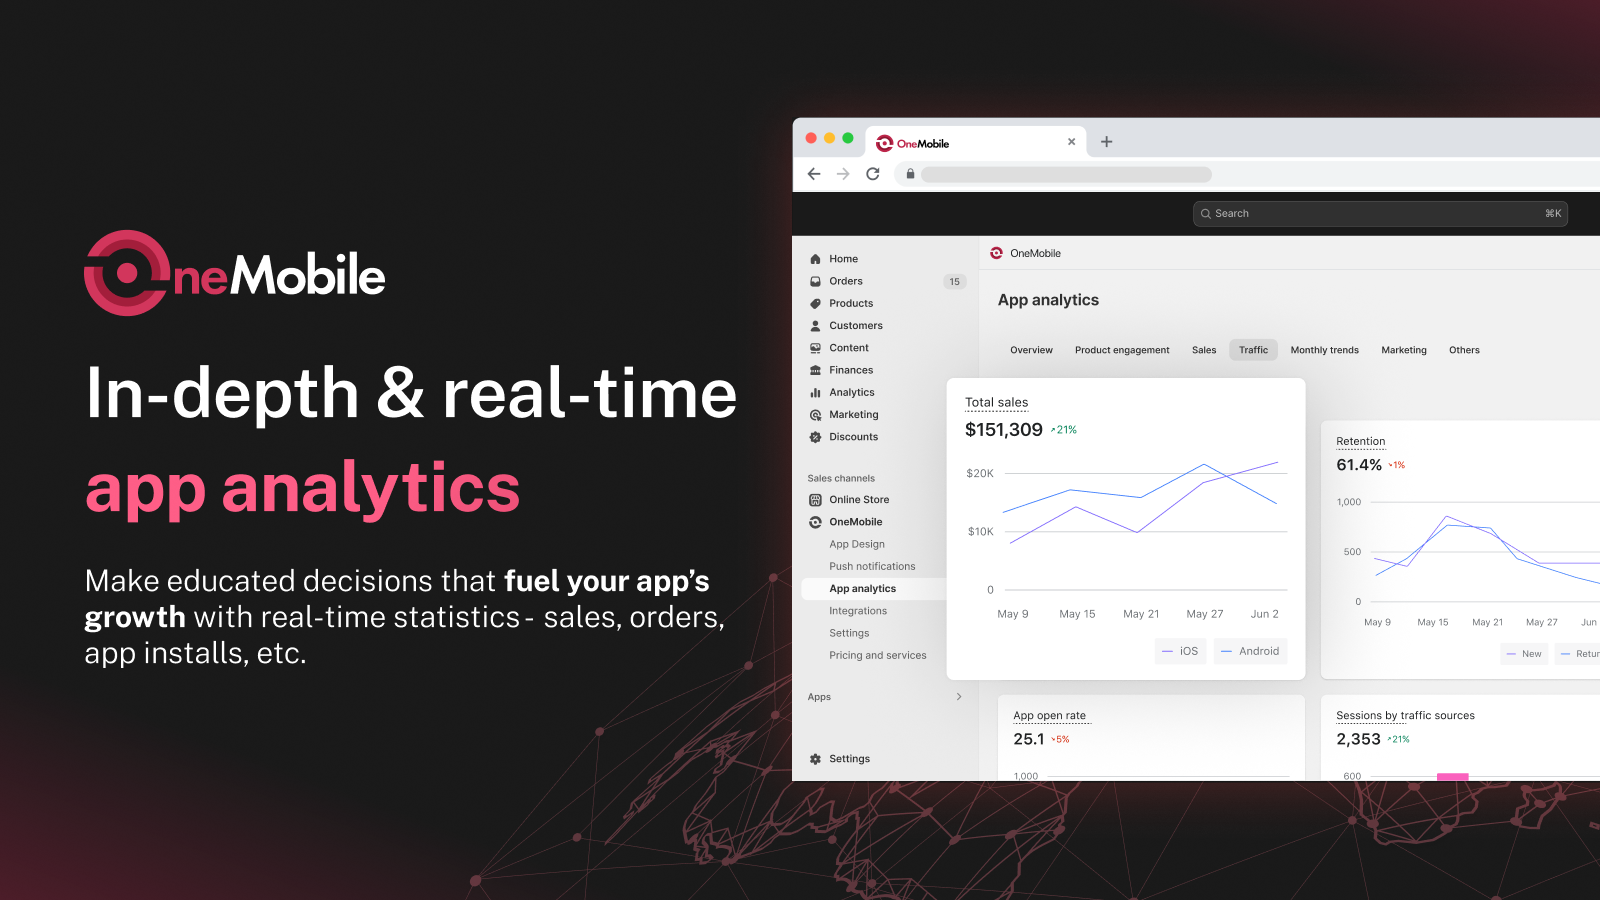 Fuel your app’s growth with real-time statistics